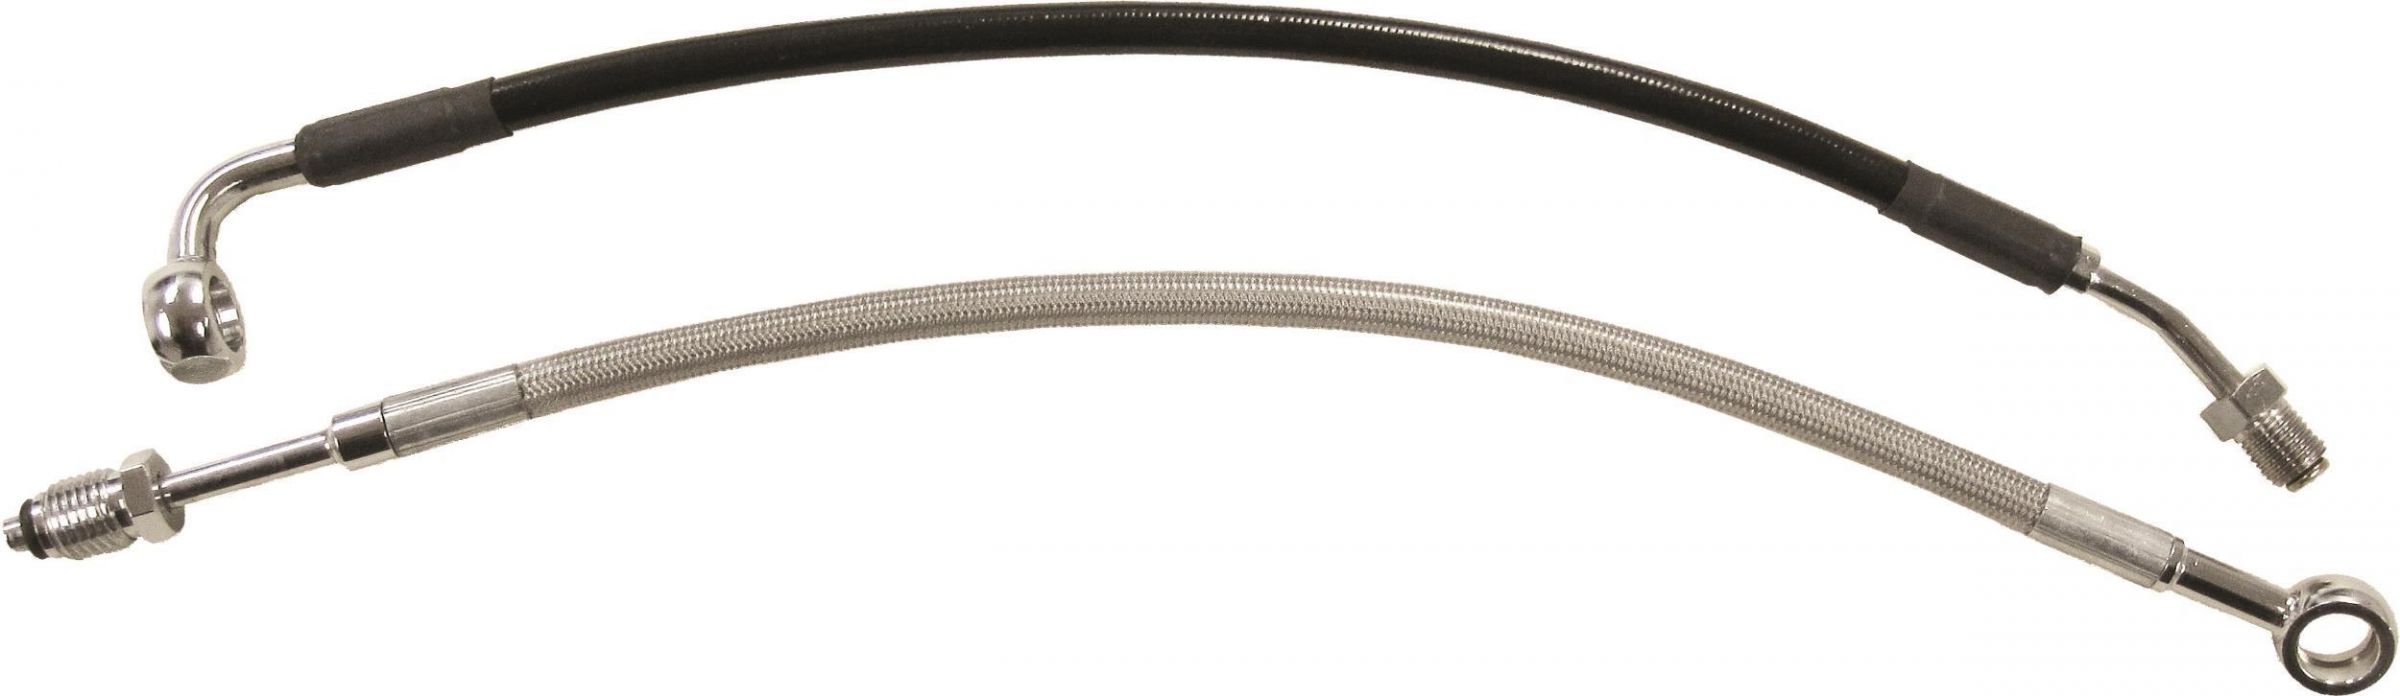 86OP-GOODRID-HD0006-1CCH-10 Stainless Steel Braided Hydraulic Clutch Line Kit - 10in. Over Stock - Clear Coated